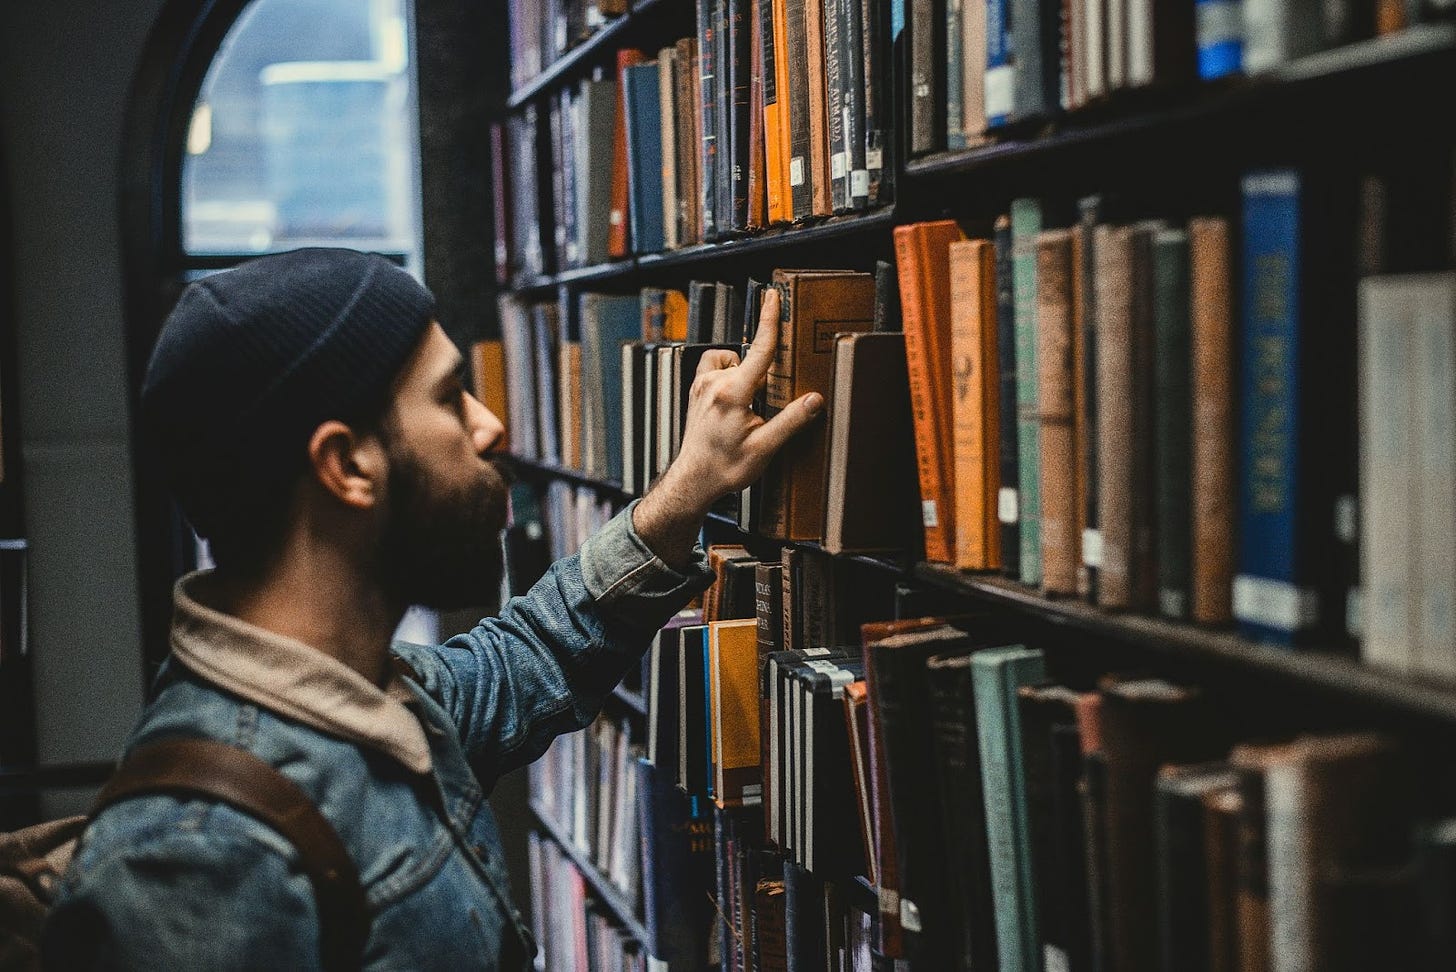 A man wearing a beanie thumbs through titles on a library bookcase